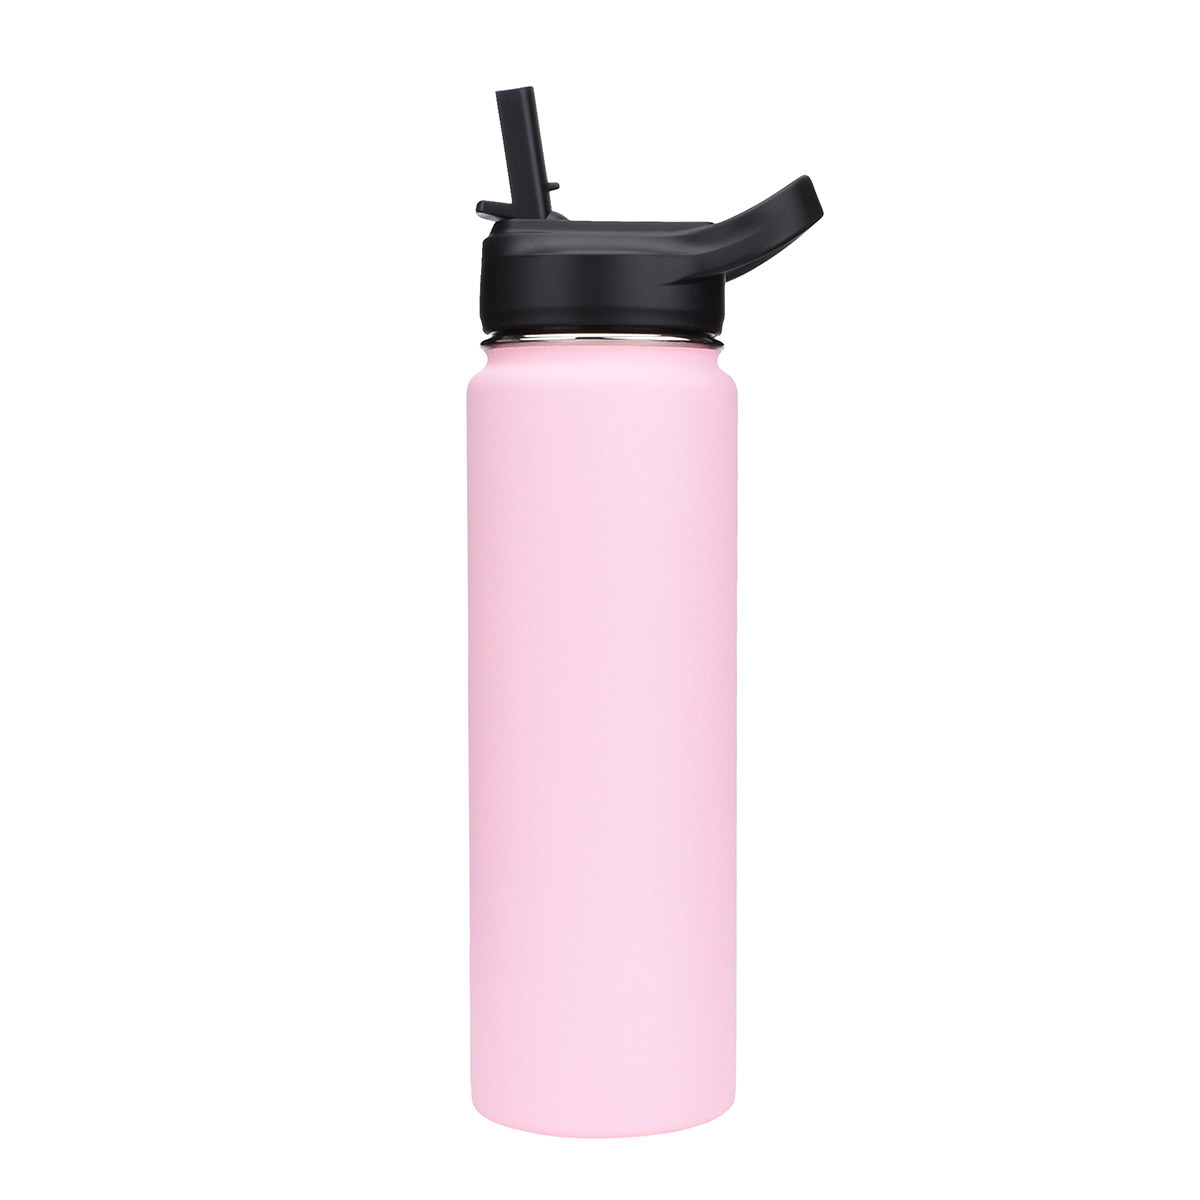 https://www.bulkflask.com/wp-content/uploads/2022/07/insulated-wide-mouth-water-bottle-with-straw-lid-24oz-blank-pink.jpg